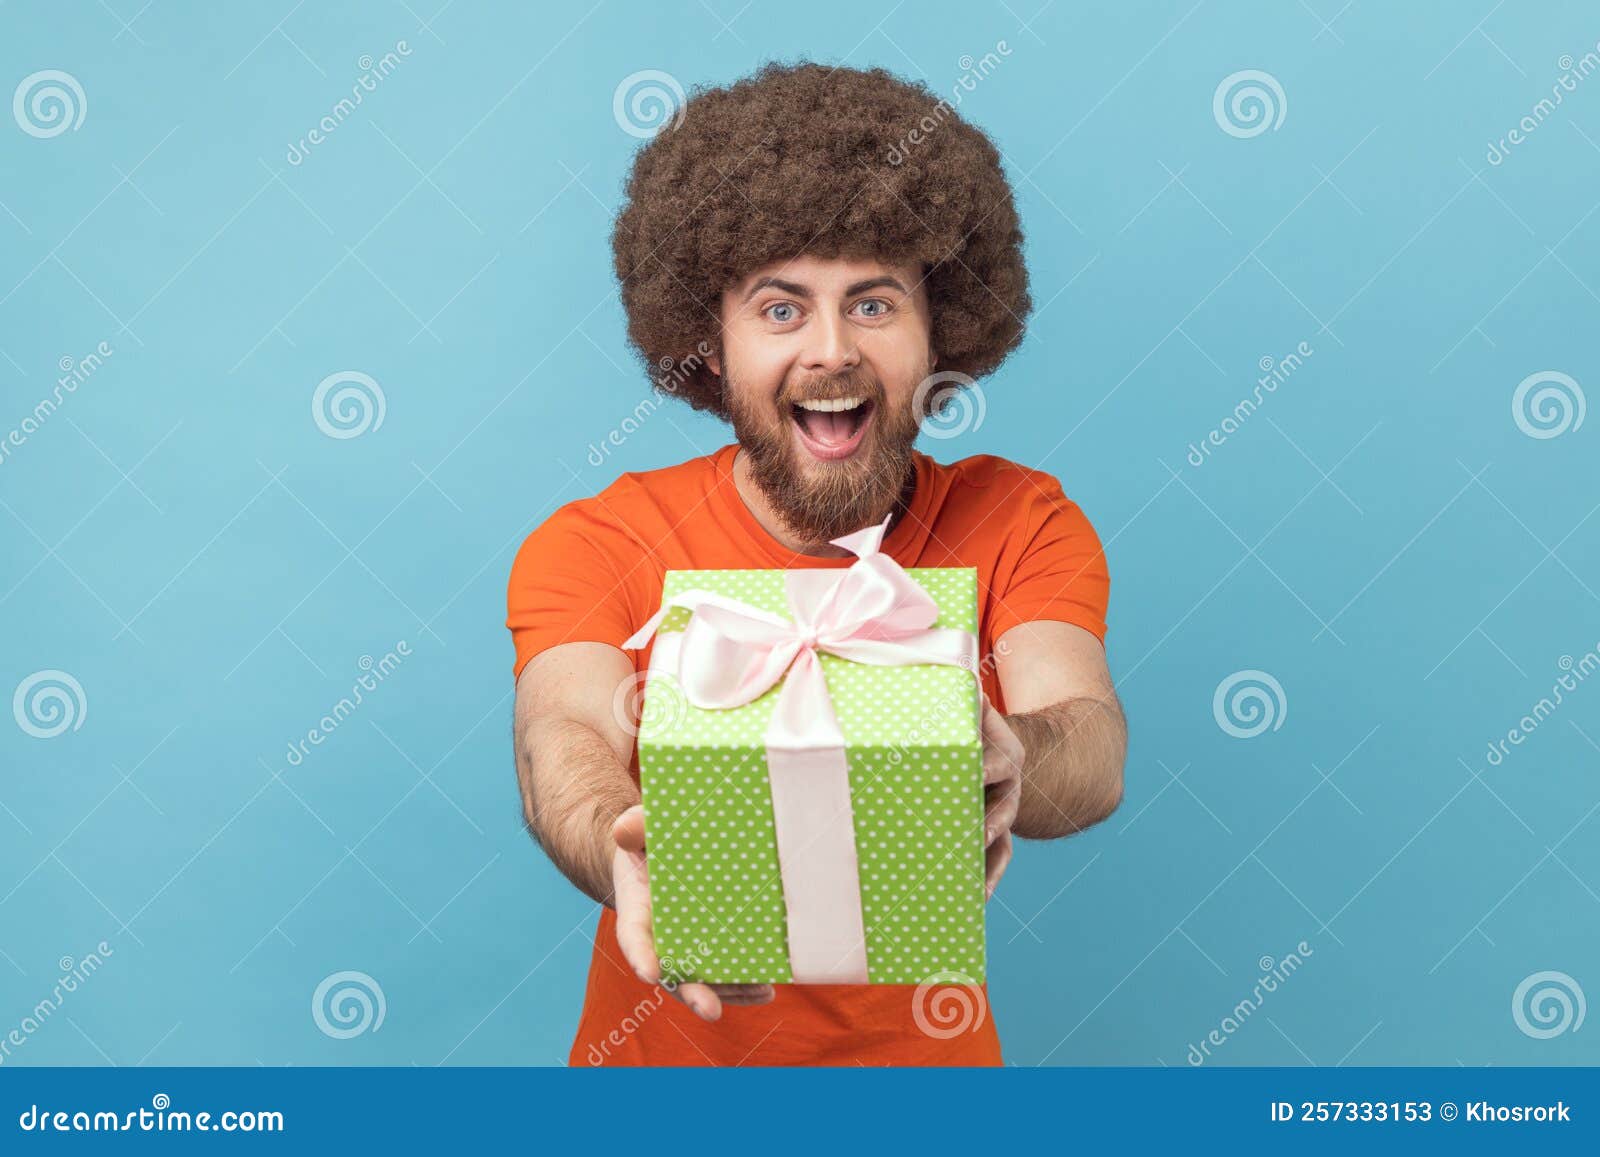 Man Giving T Congratulating On Birthday And Offering Surprise Holiday Bonus Wrapped In Box